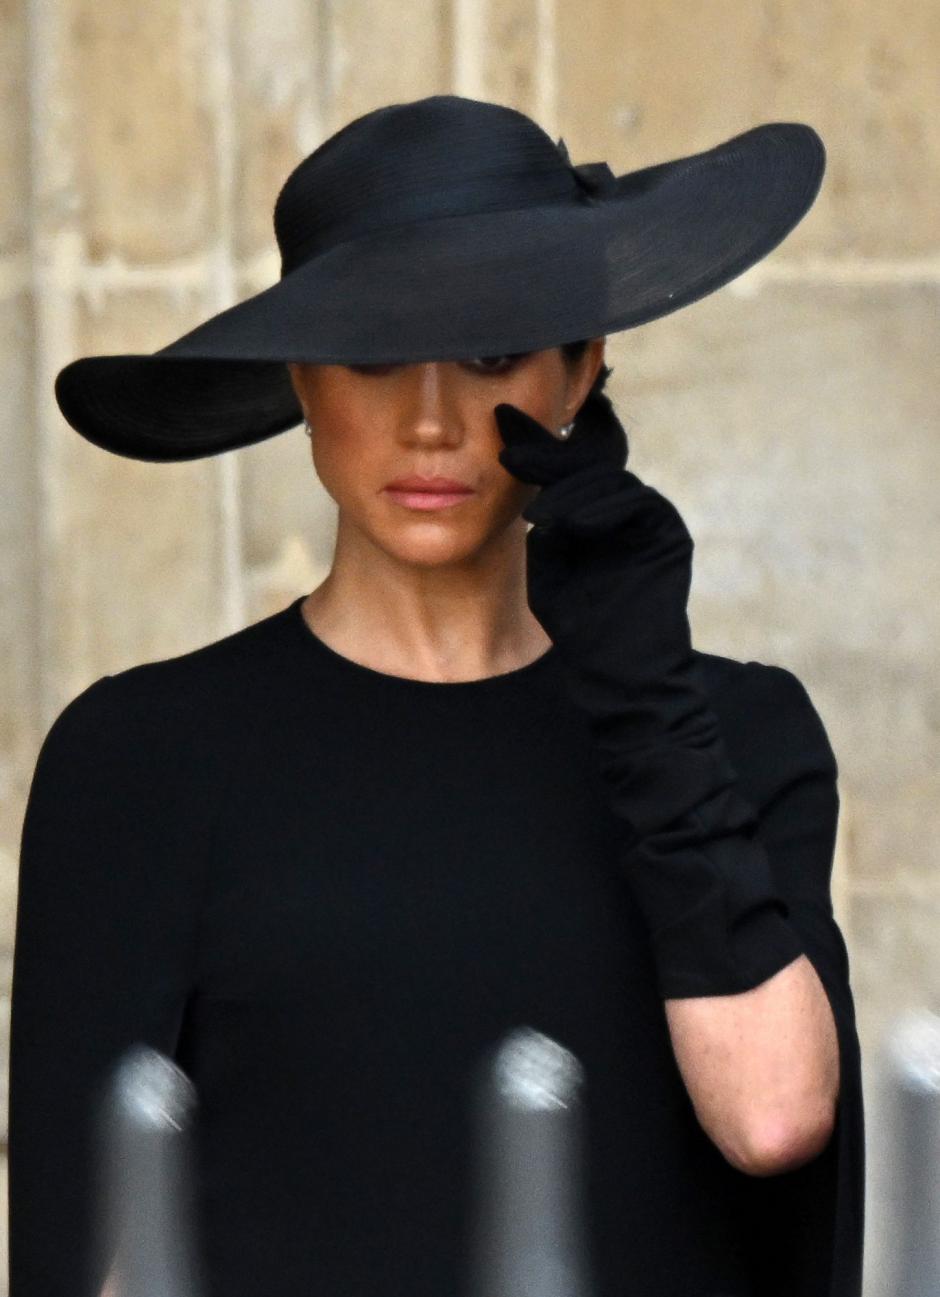 Meghan Markle , Duchess of Sussex during the carriage procession for Queen Elizabeth II's state funeral from London to Windsor on 19 September 2022